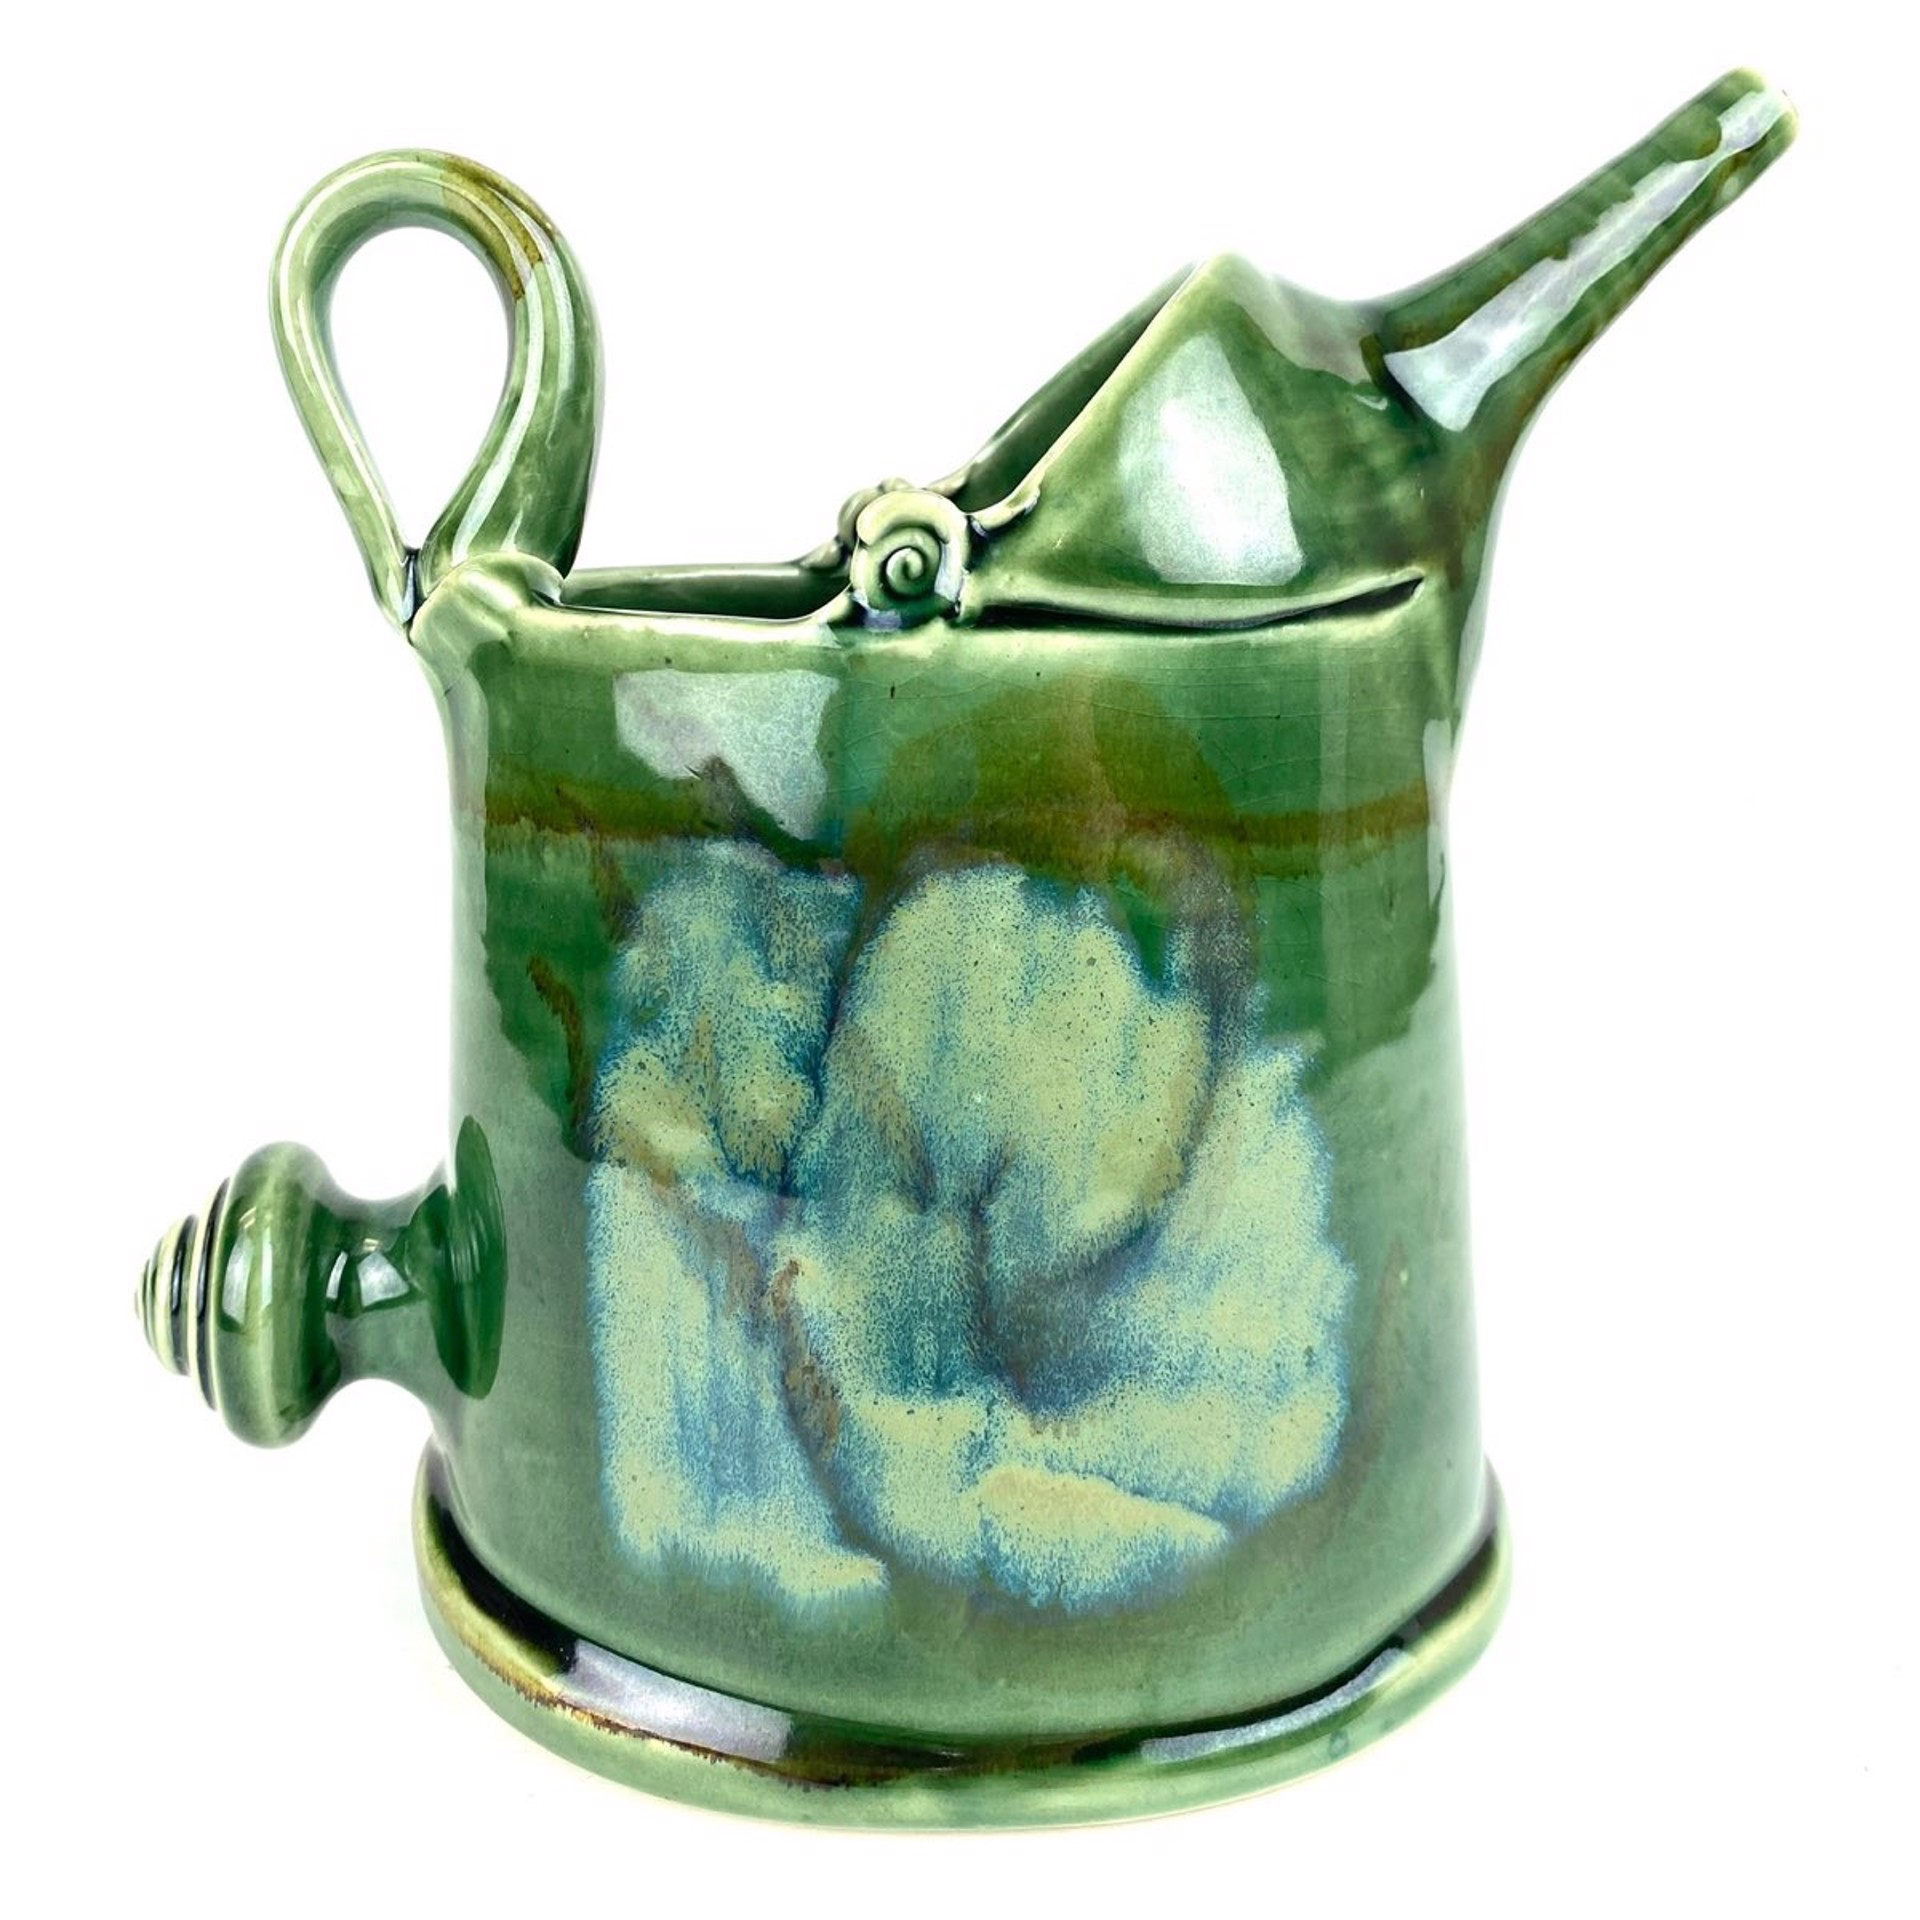 Thrown and Altered Watering Vessel by Mary Lynn Portera